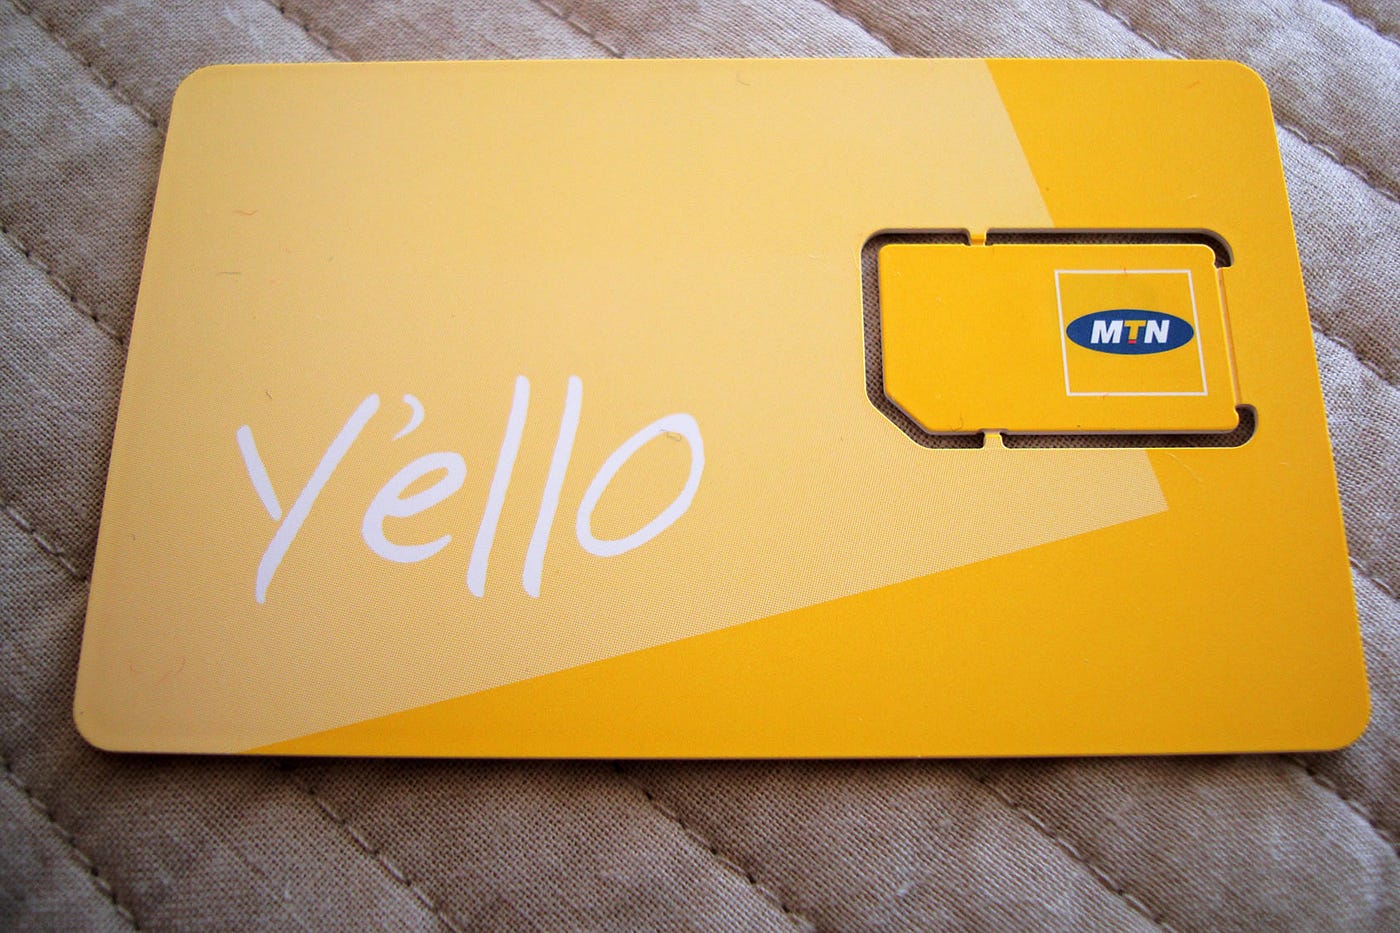 unlocking-mtn-sim-card-after-puk-block-step-by-step-guide